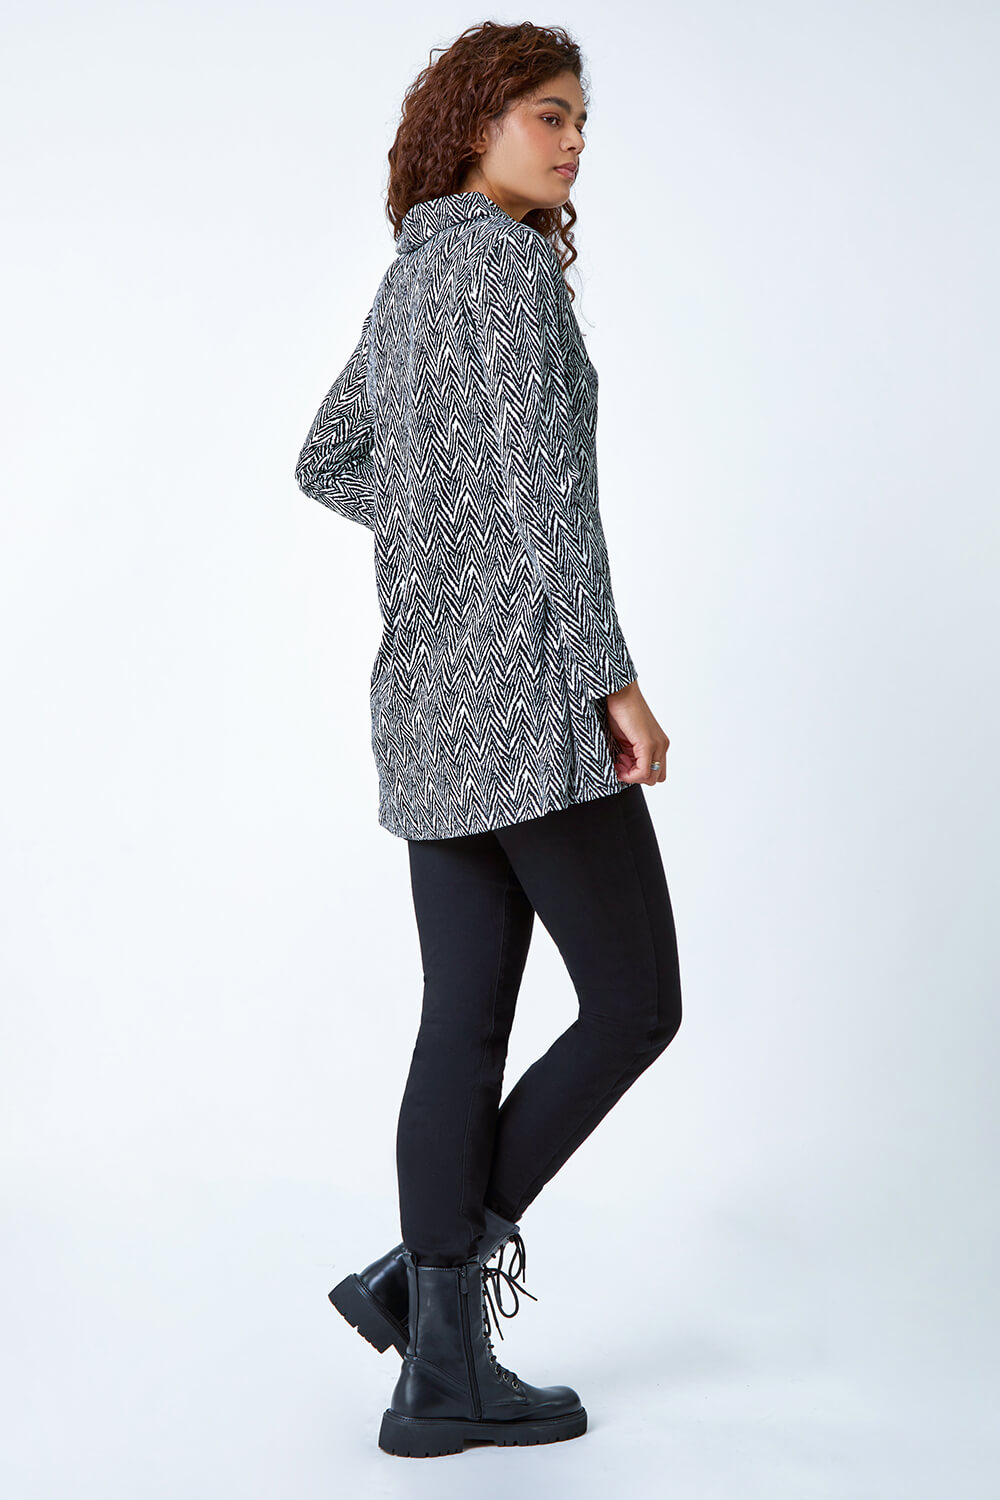 Black Geo Print Wrap Front Cowl Neck Stretch Top, Image 3 of 5